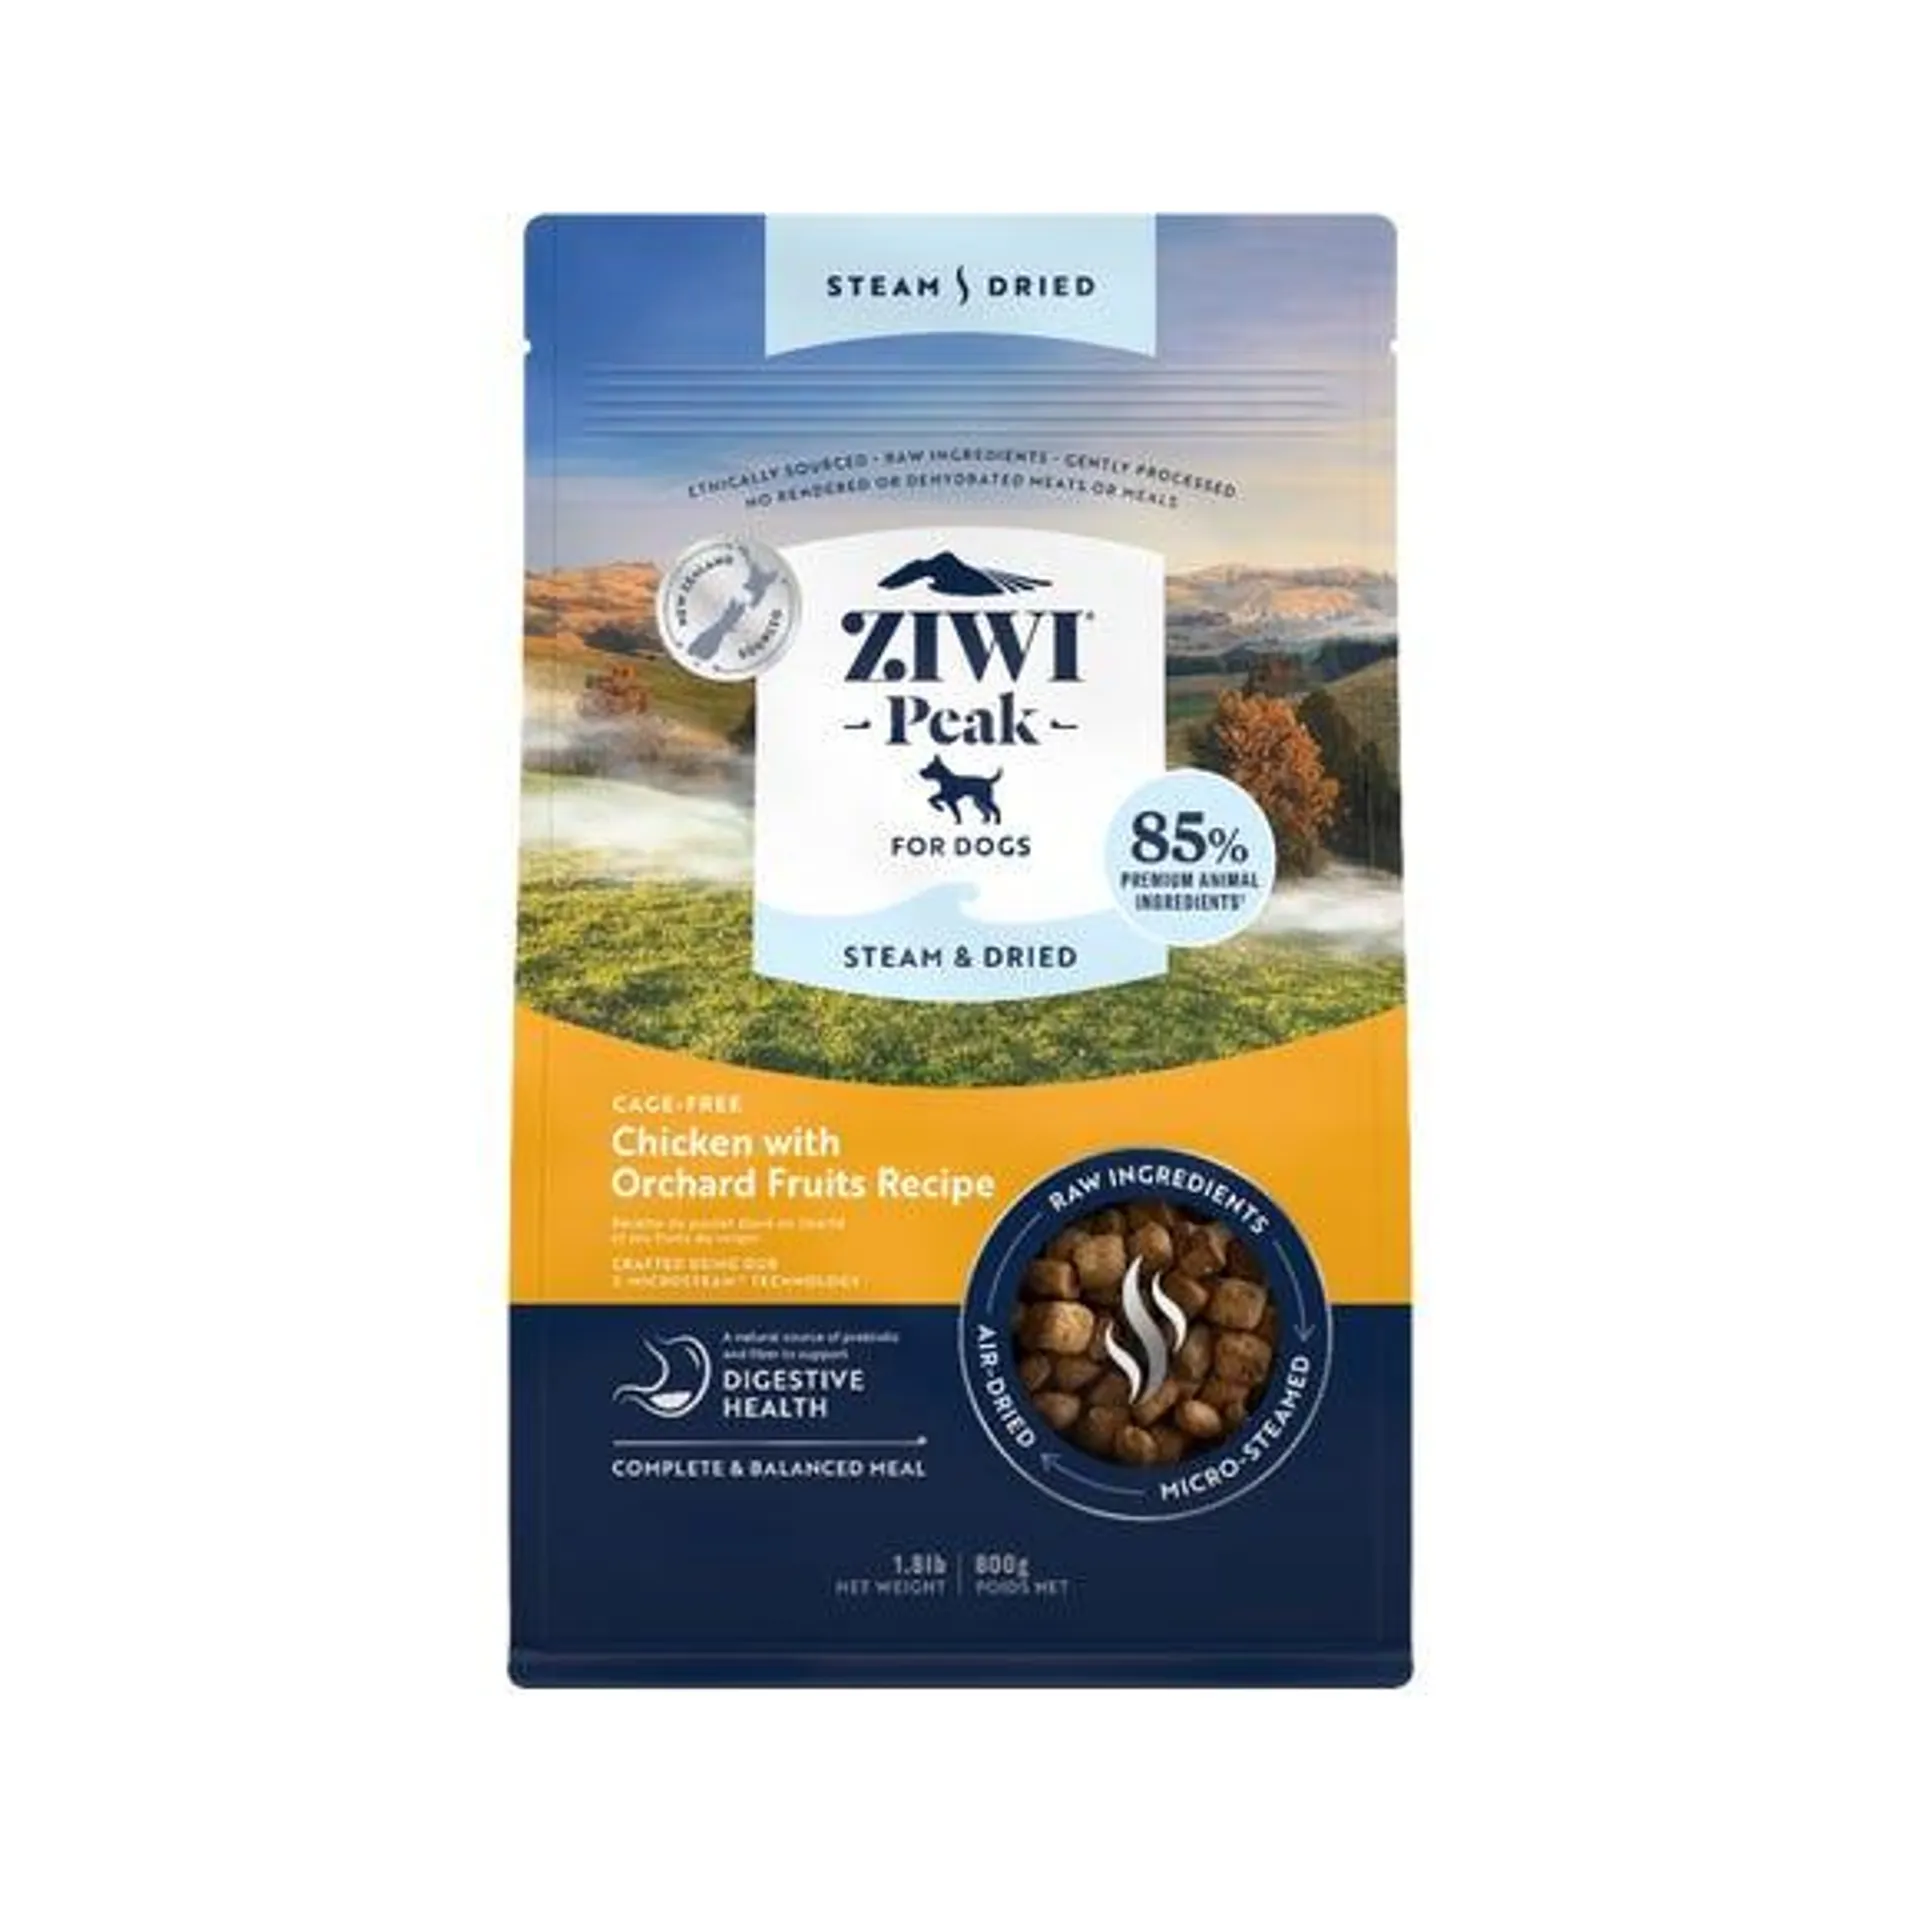 800g Ziwi Peak Steam & Dried Dog Cage-free Chicken with Orchard Fruits